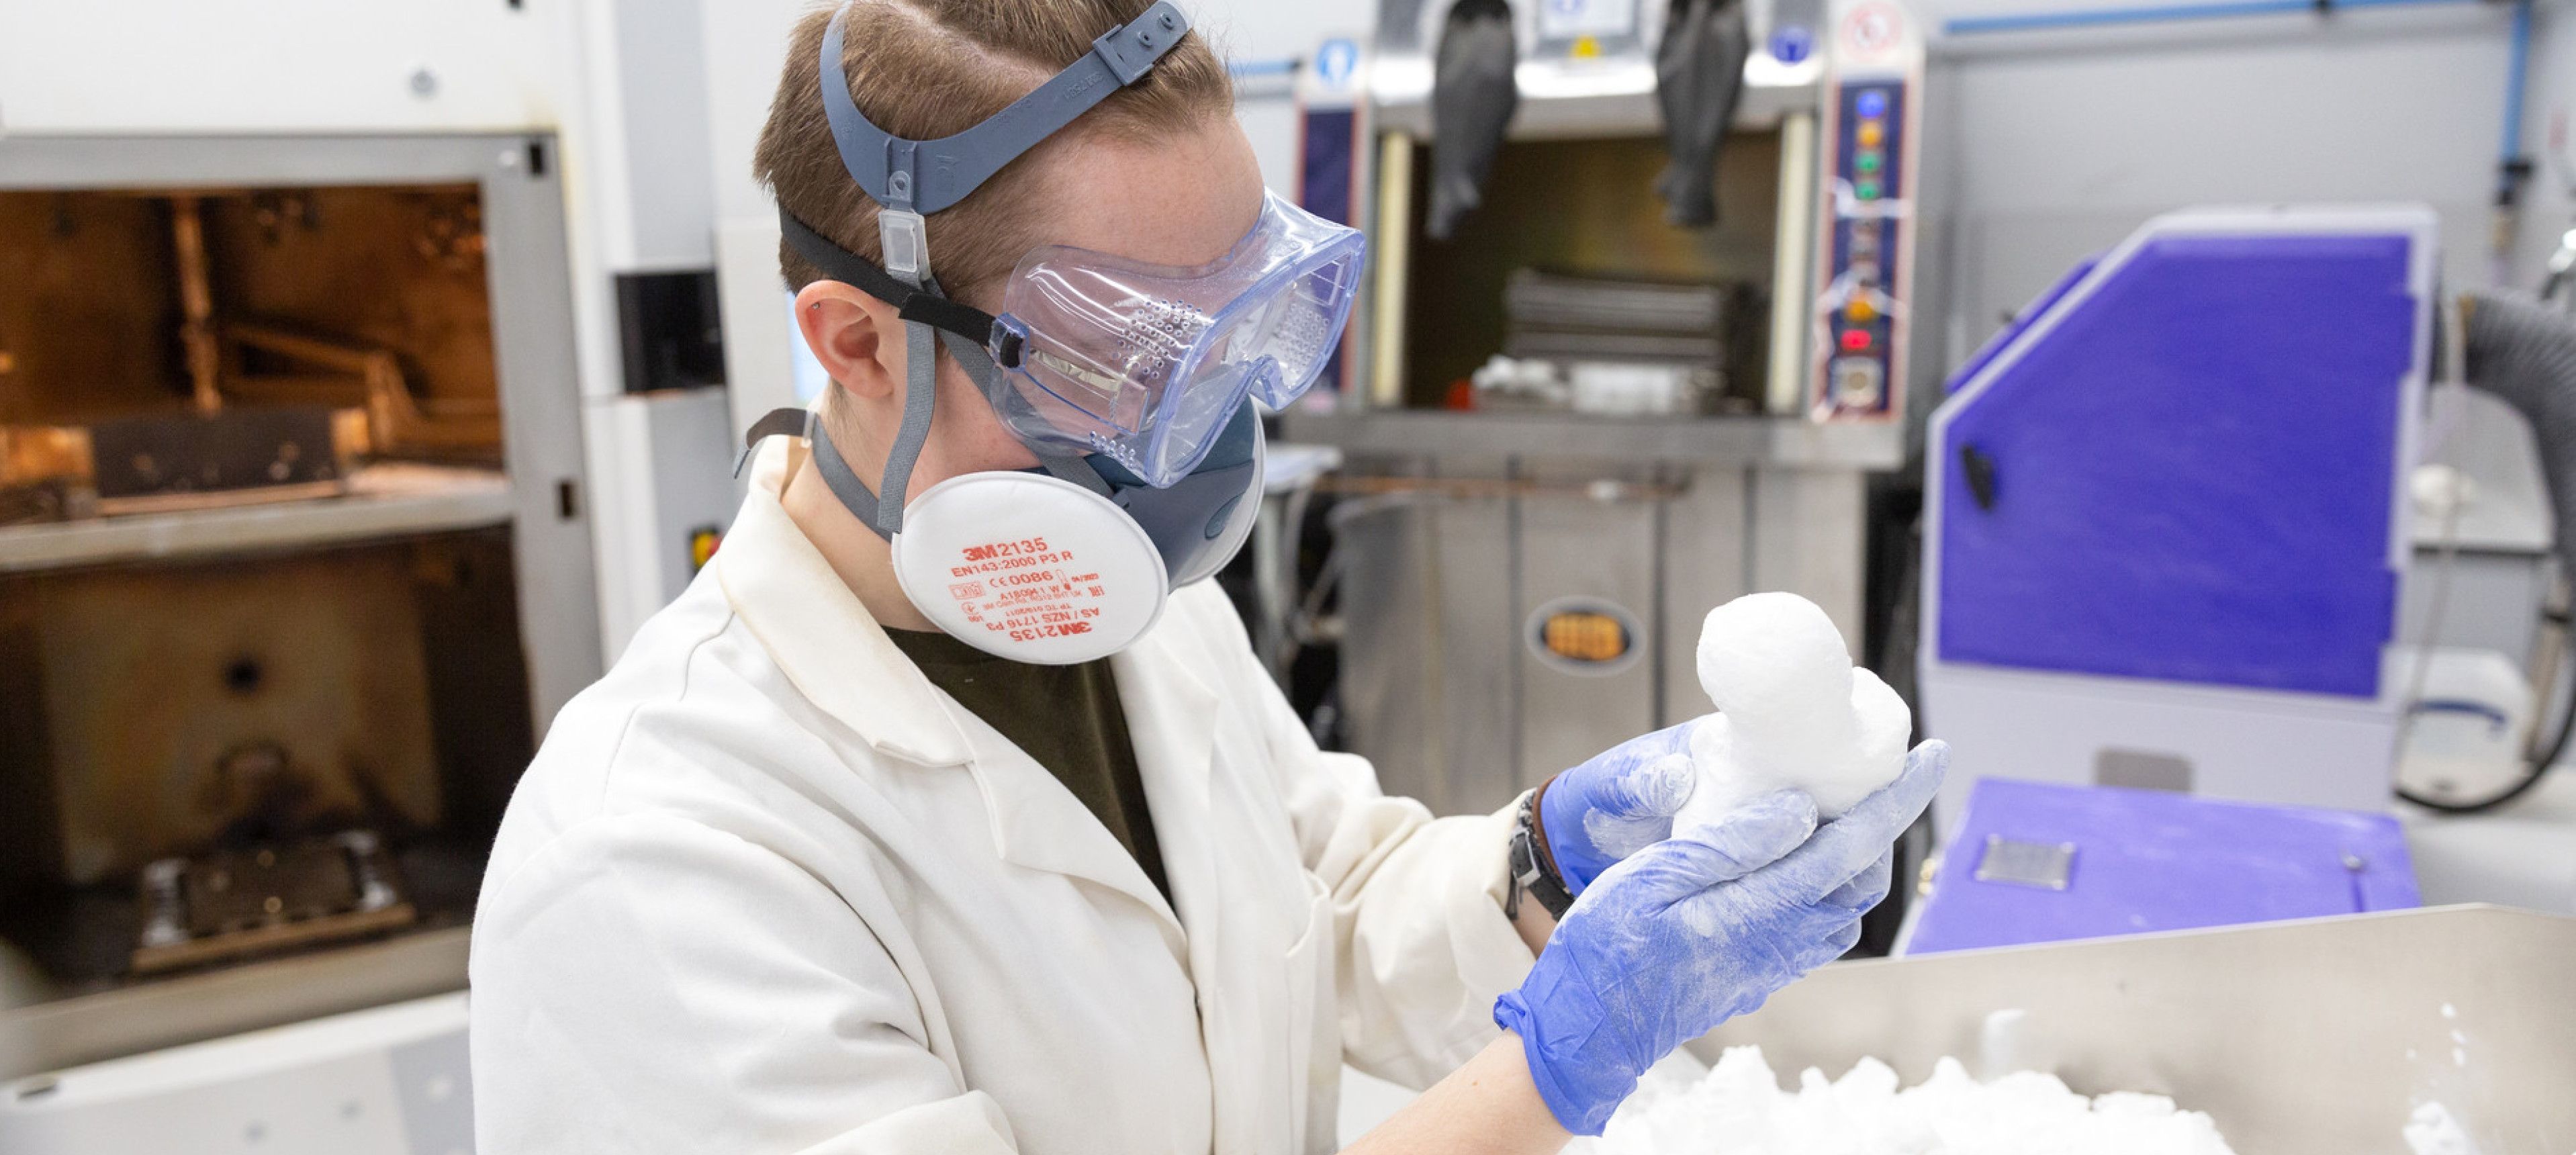 Researcher in MSk lab wearing PPE and holding a 3D printed object